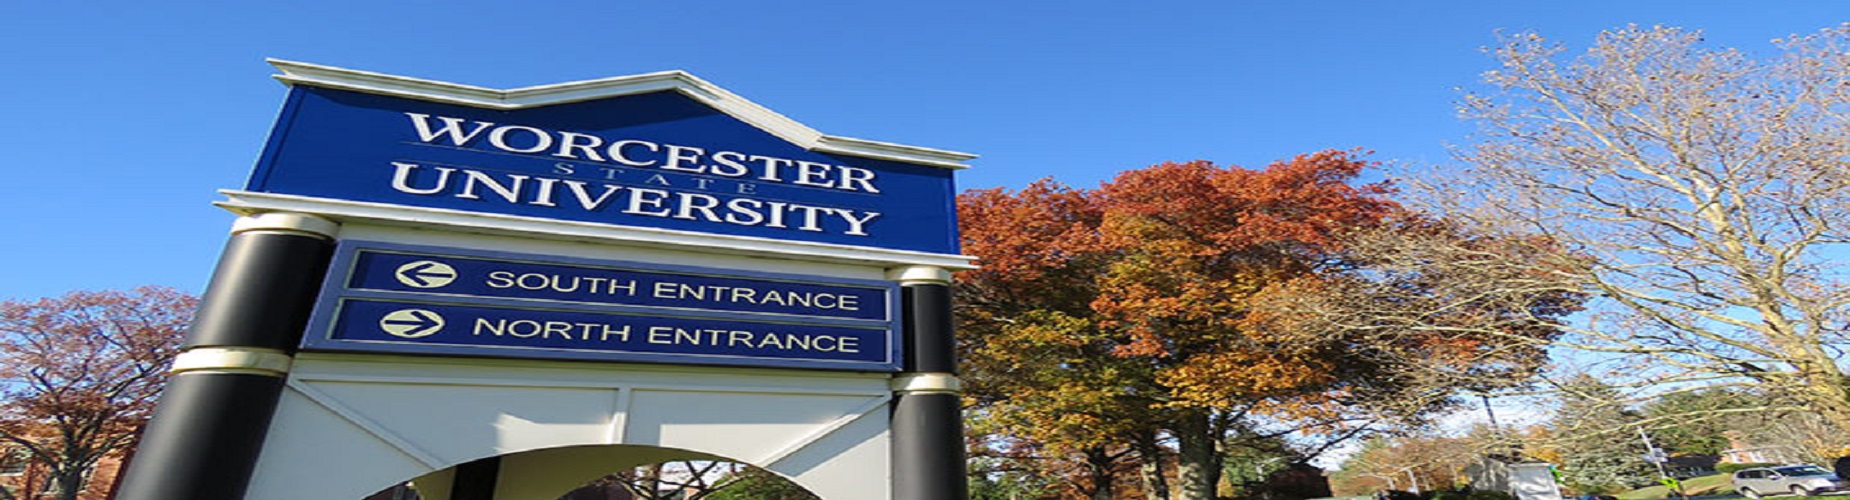 Worcester State University Bookstore Promo Code